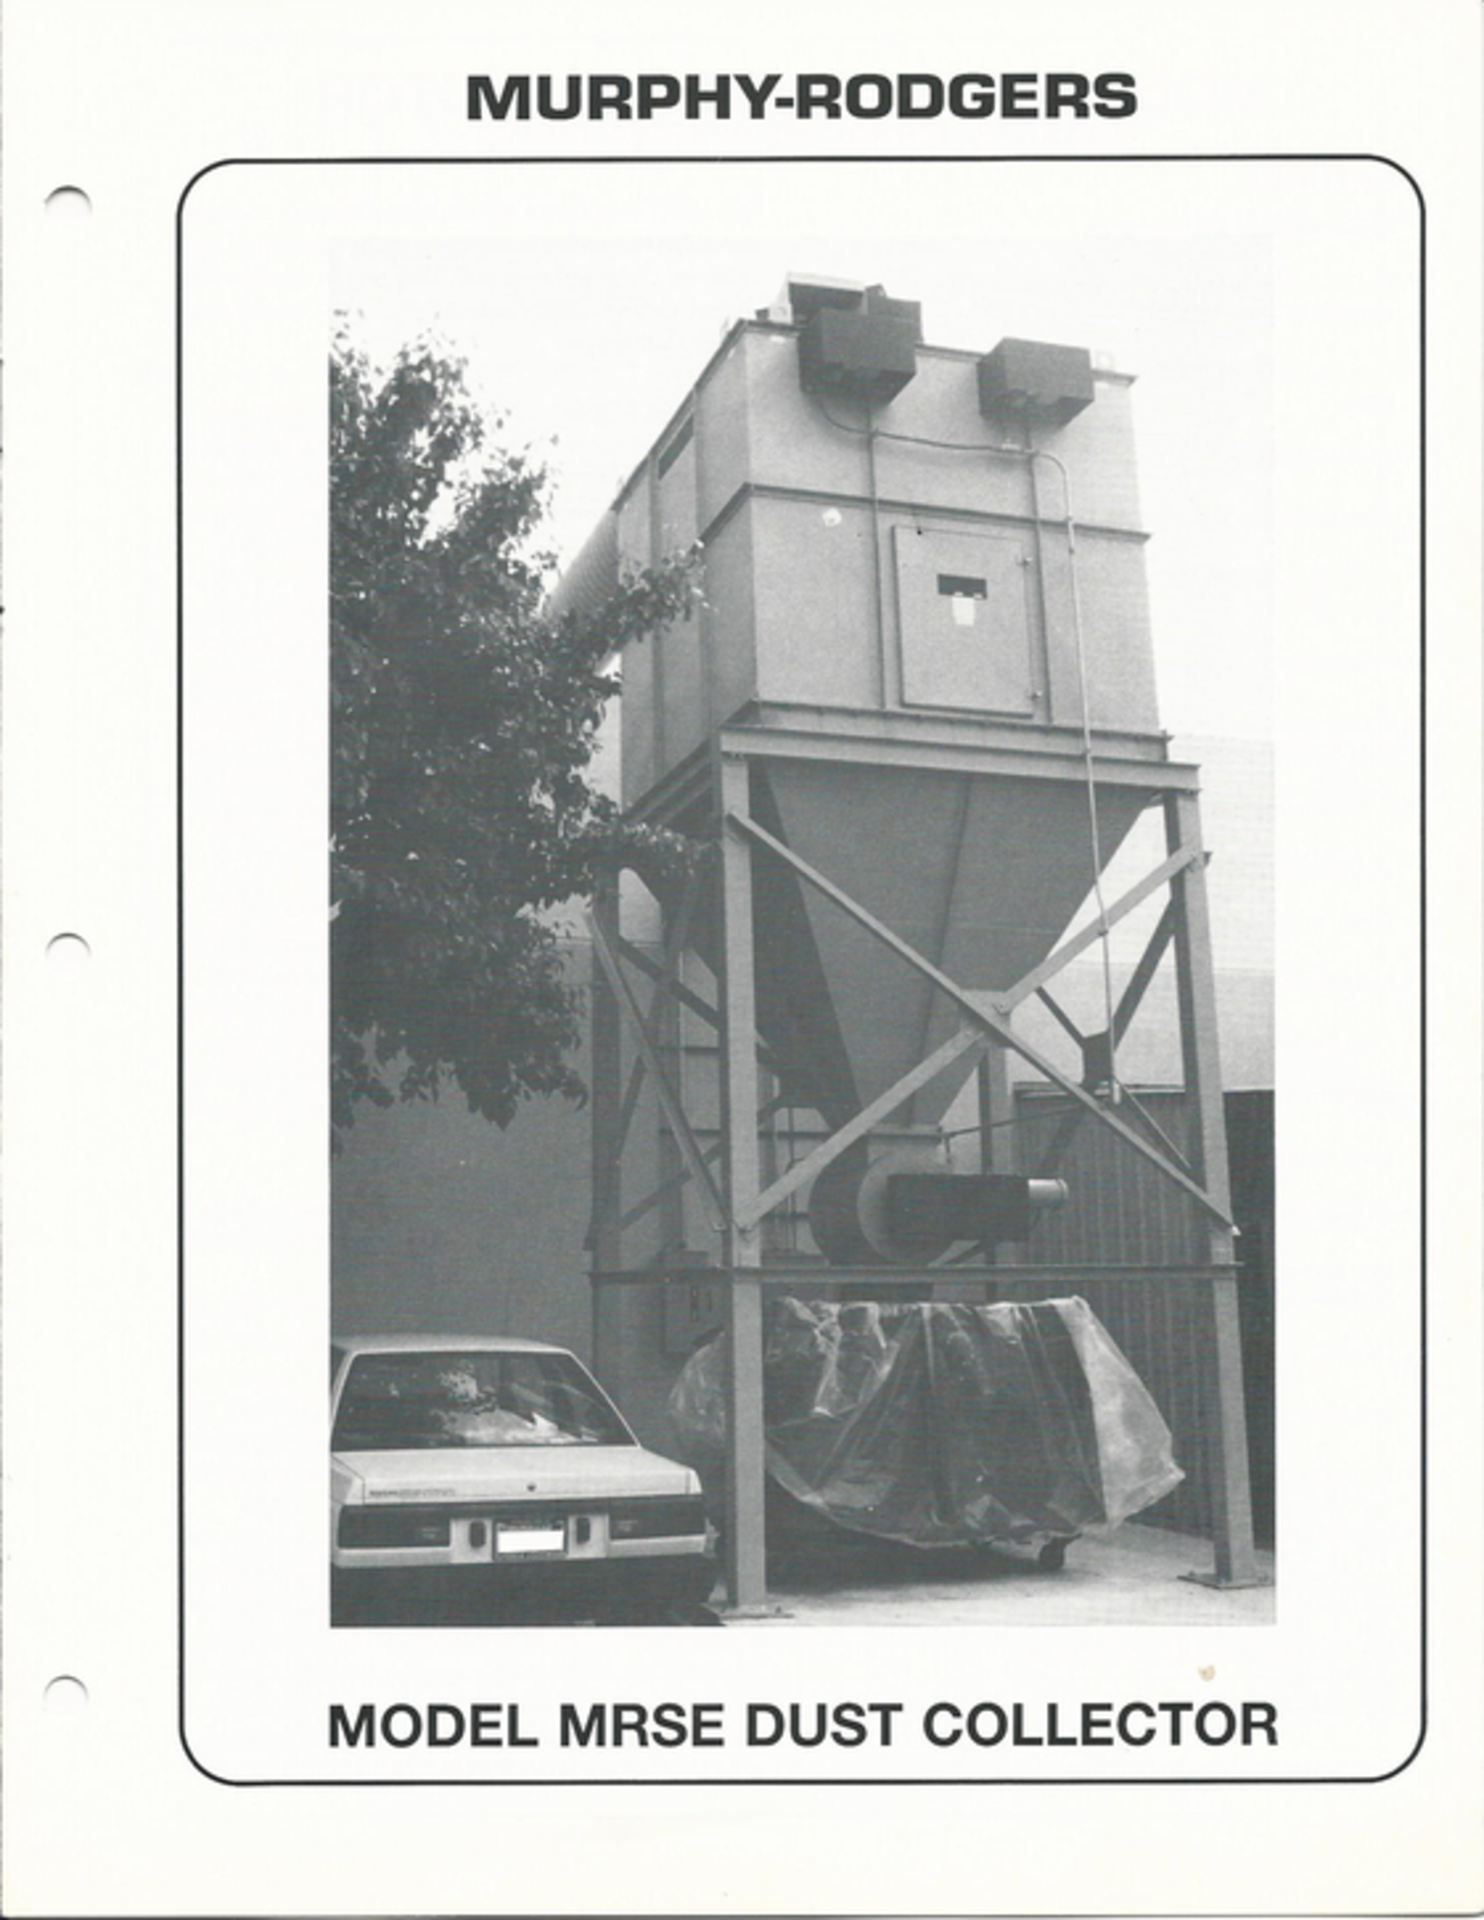 Murphy-Rodgers MRSE-17-4D Dust Collector - Image 8 of 8